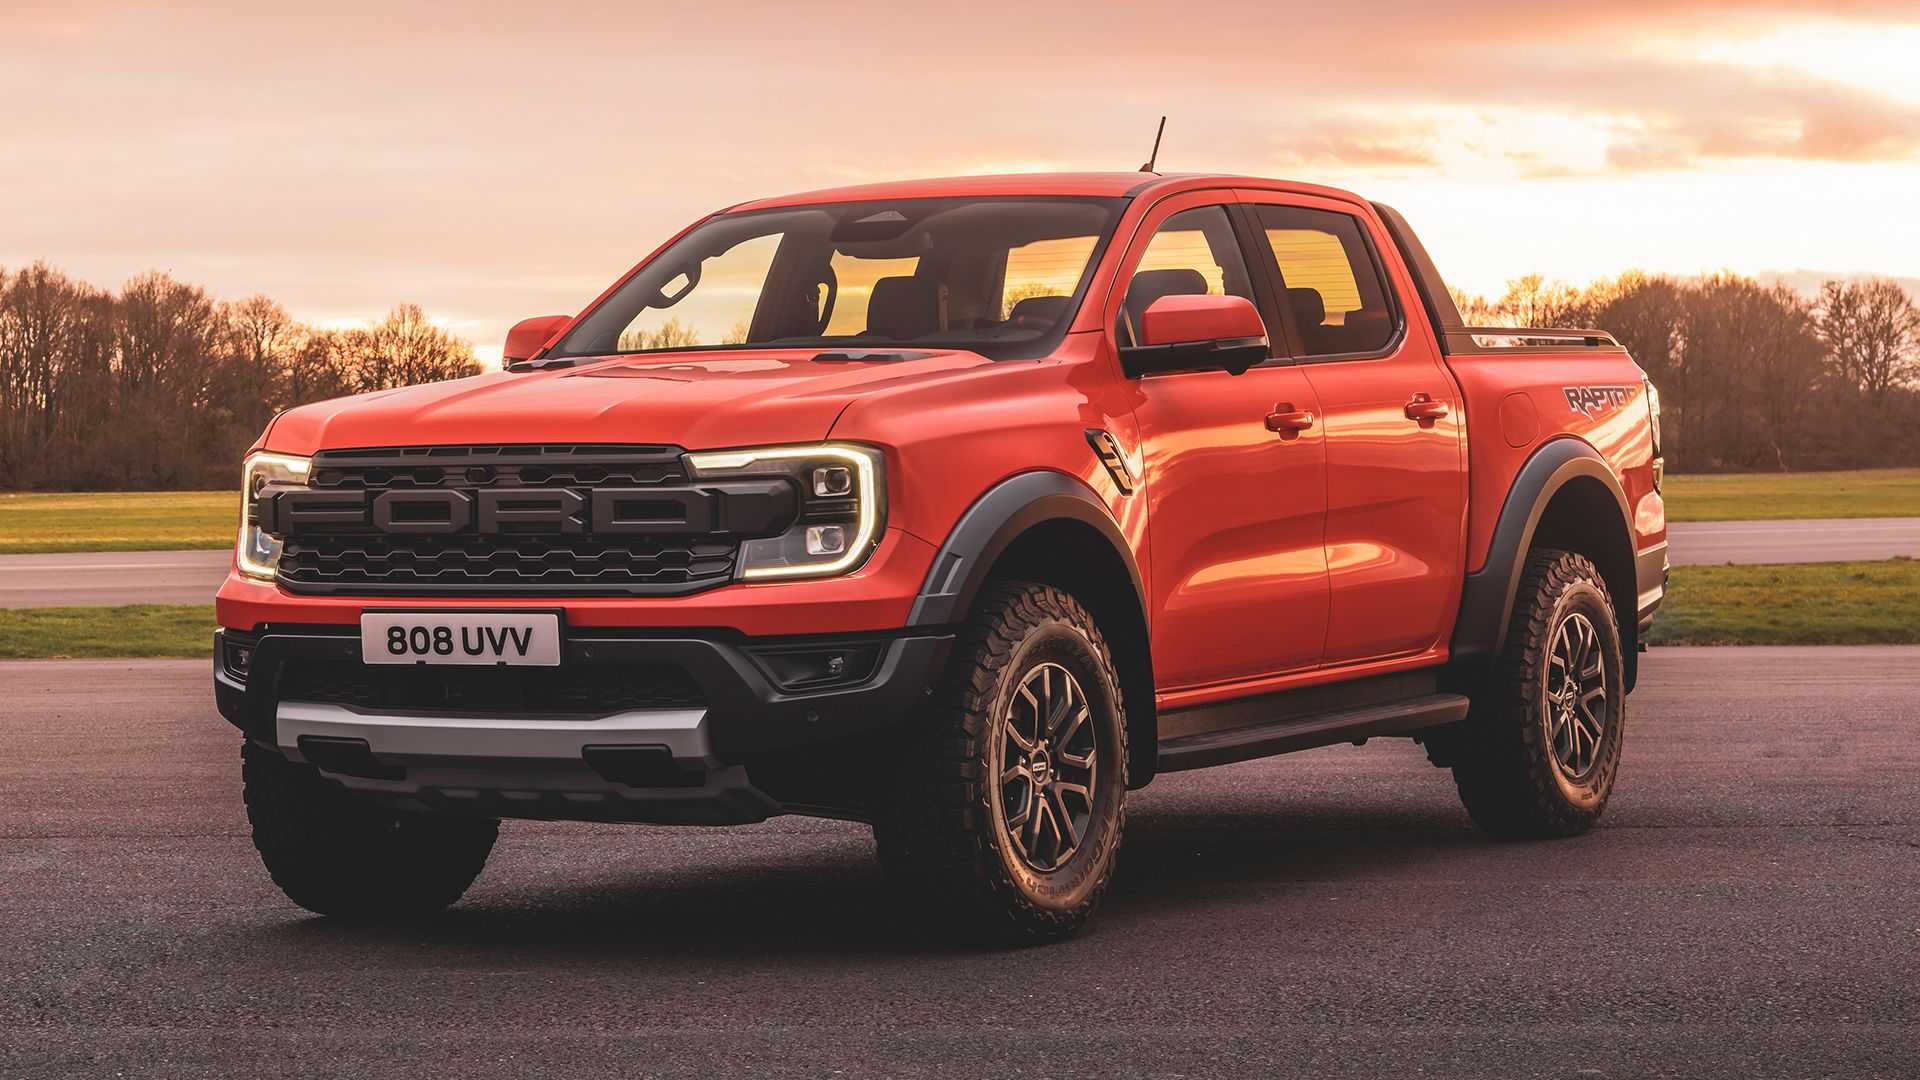 The 2024 Ford Ranger Raptor is coming to America